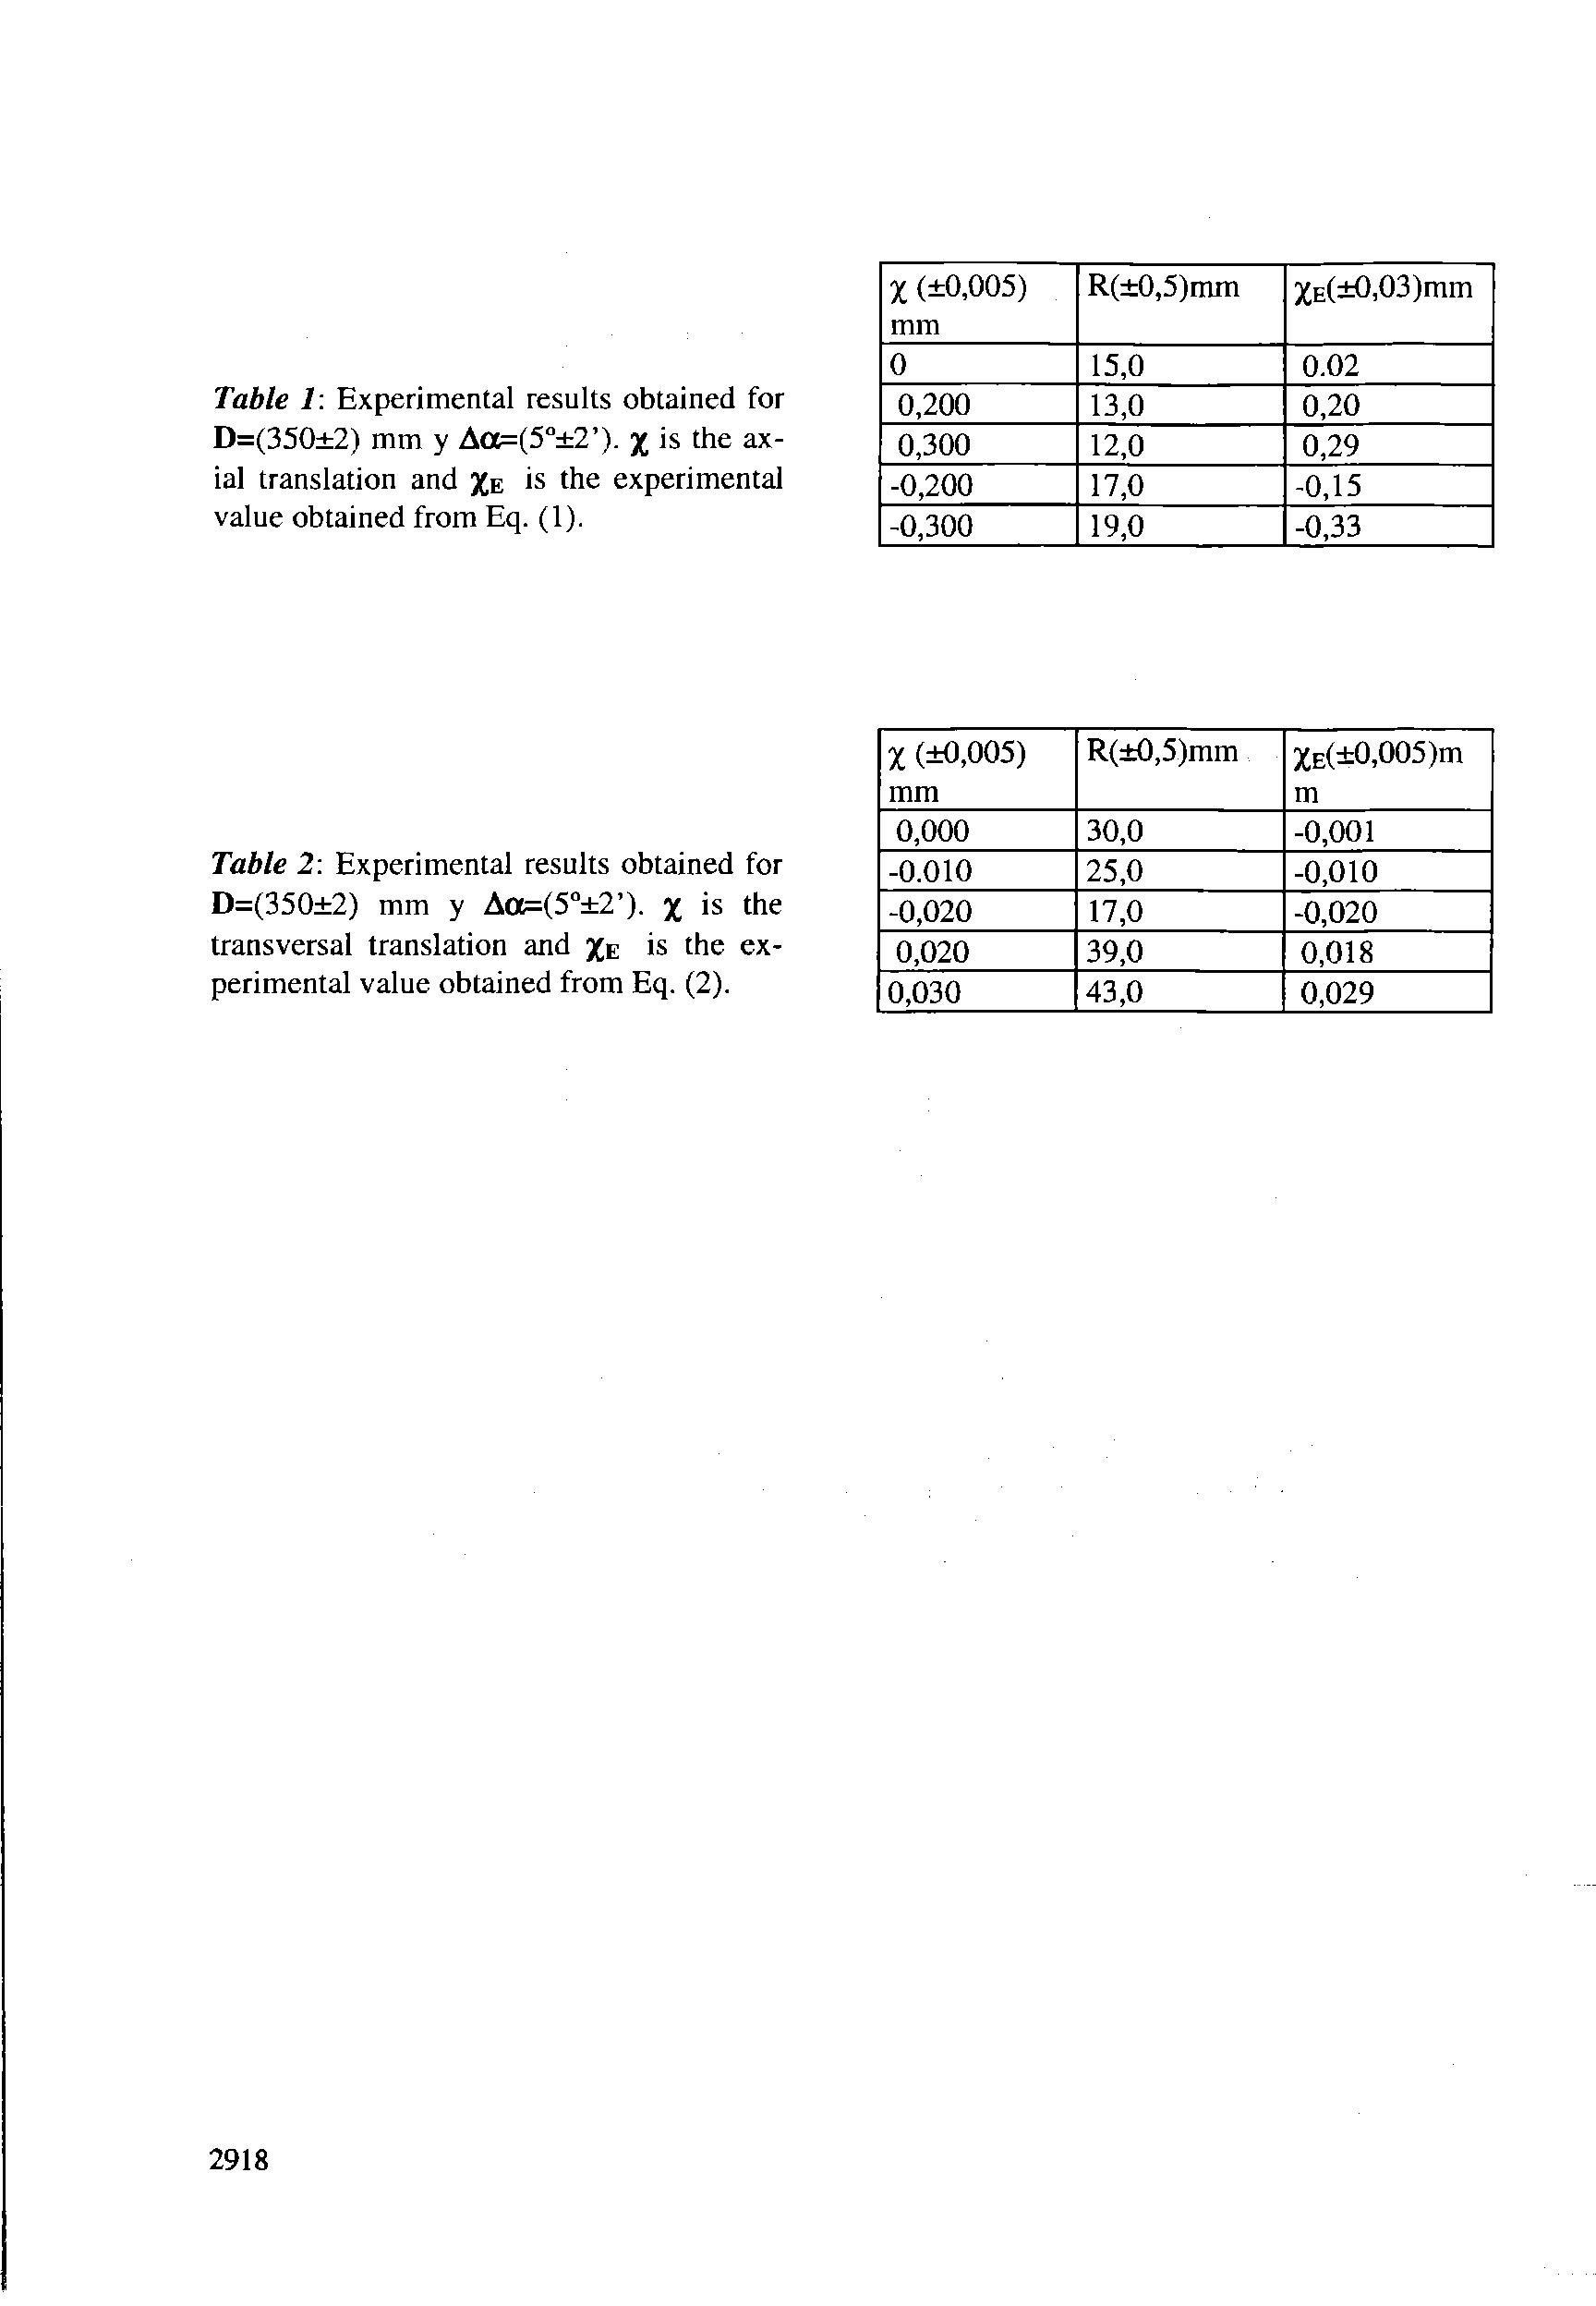 Table 1 Experimental results obtained for D=(350 2) mm y Act=(5° 2 ). x is the axial translation and Xe is the experimental value obtained from Eq. (1).